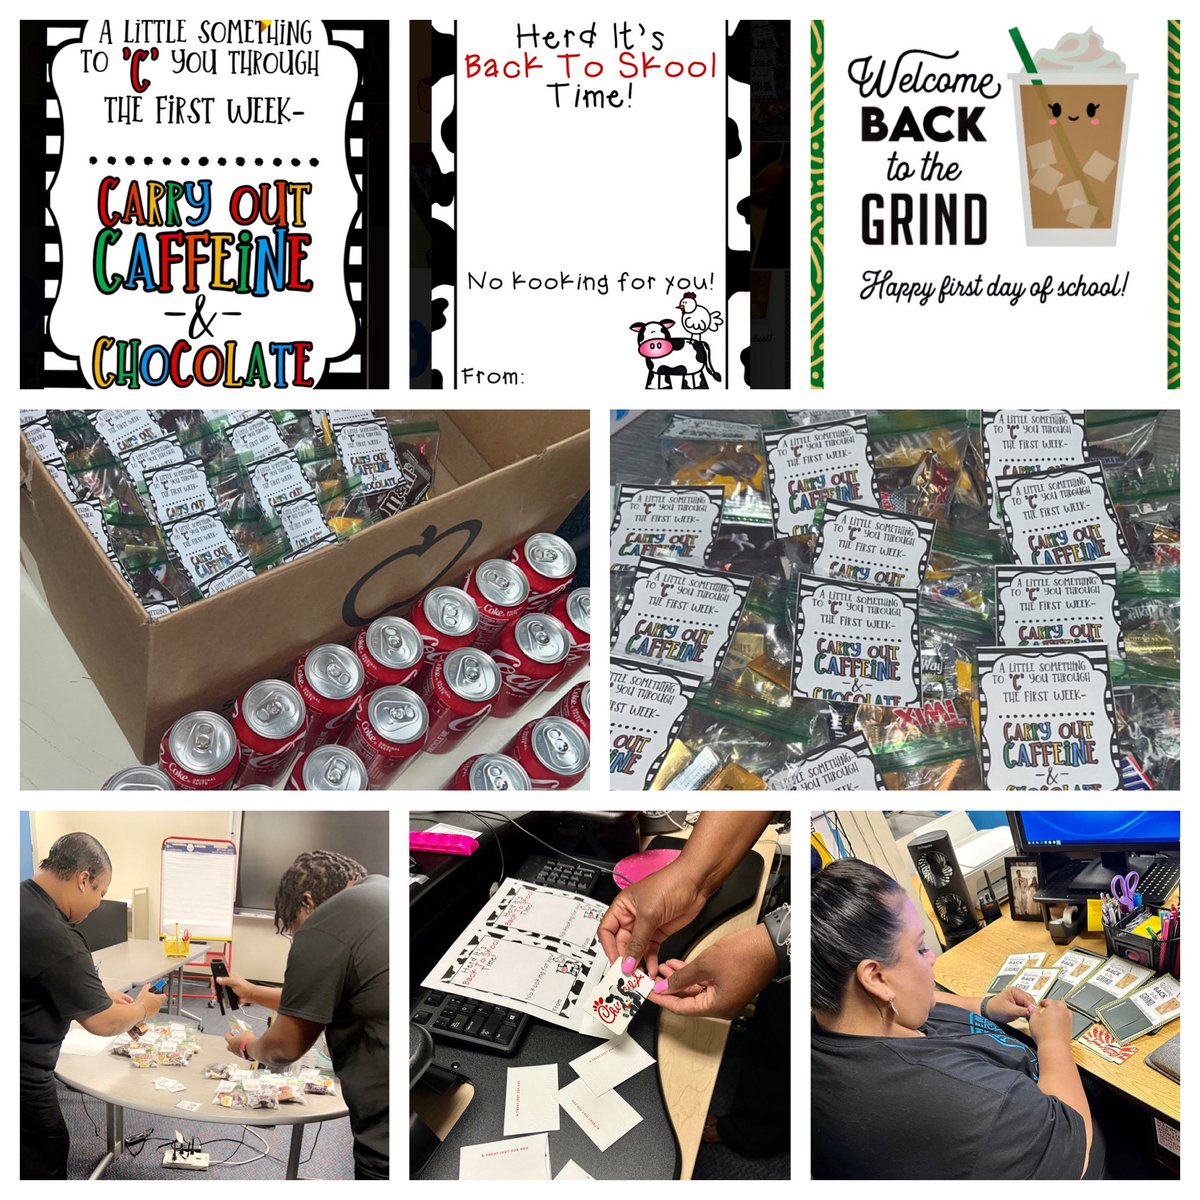 Content specialists this morning getting First Day of School treats ready for all the wonderful classroom teachers💙💛 It was definitely a great first day of school! @ChambersCharger @AliefISD #AliefProud #BuildingRelationships #InstructionalCoaches #LiteracyLabAdventures